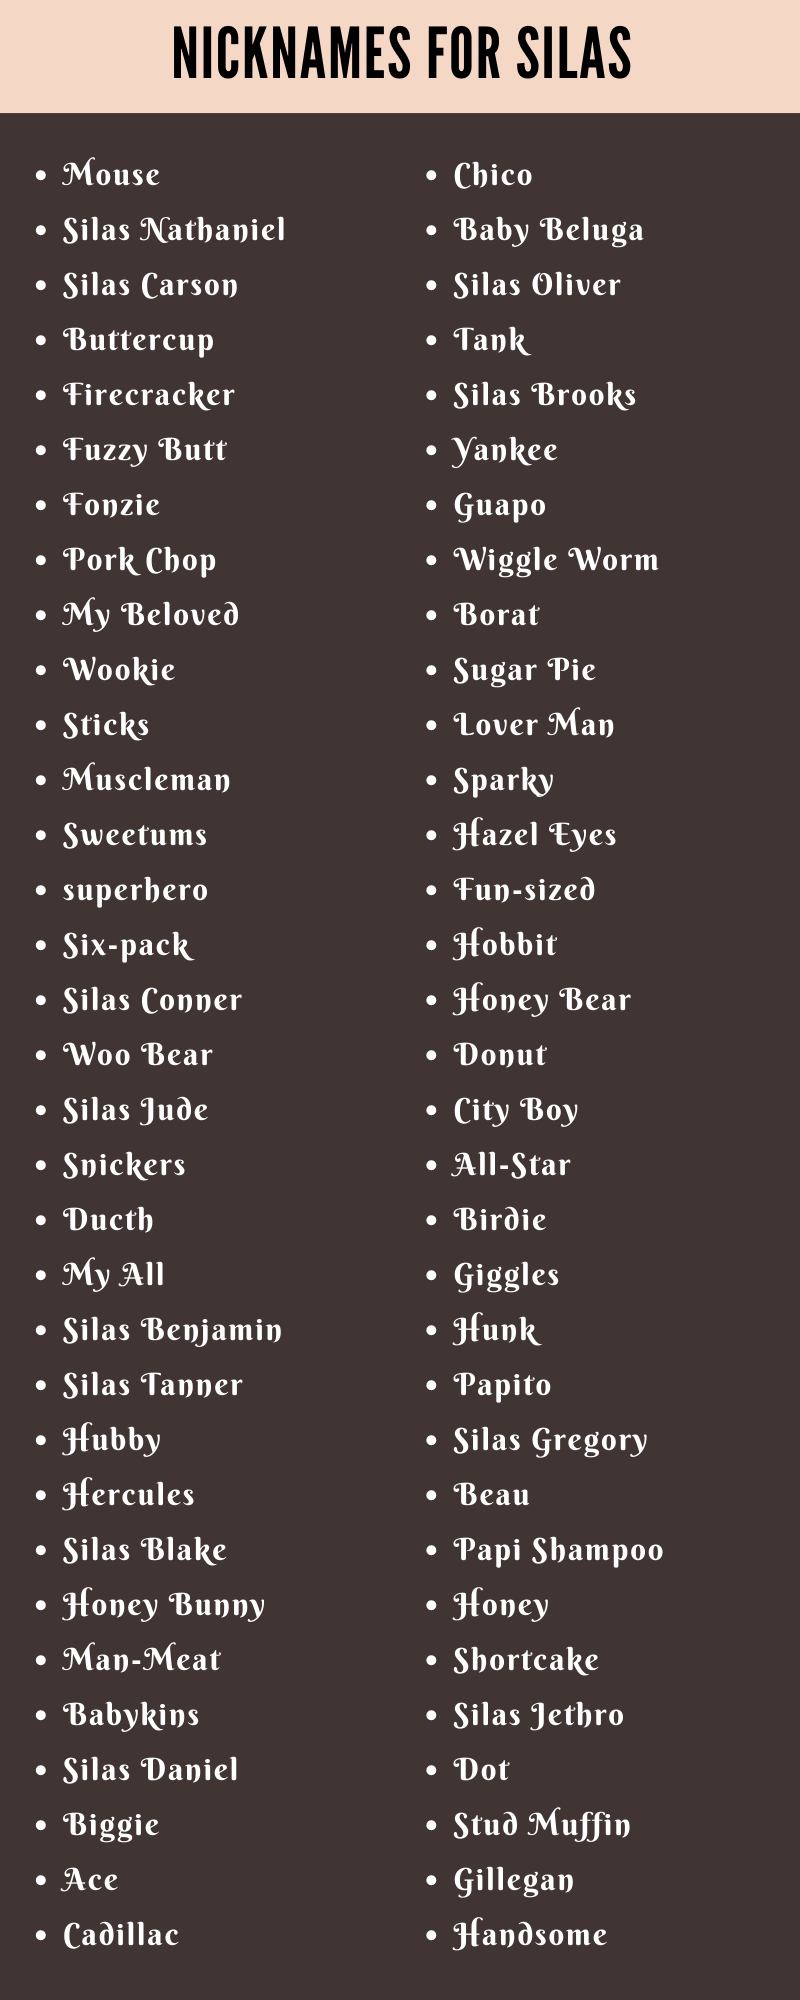 Nicknames For Silas: 200 Adorable and Cute Names